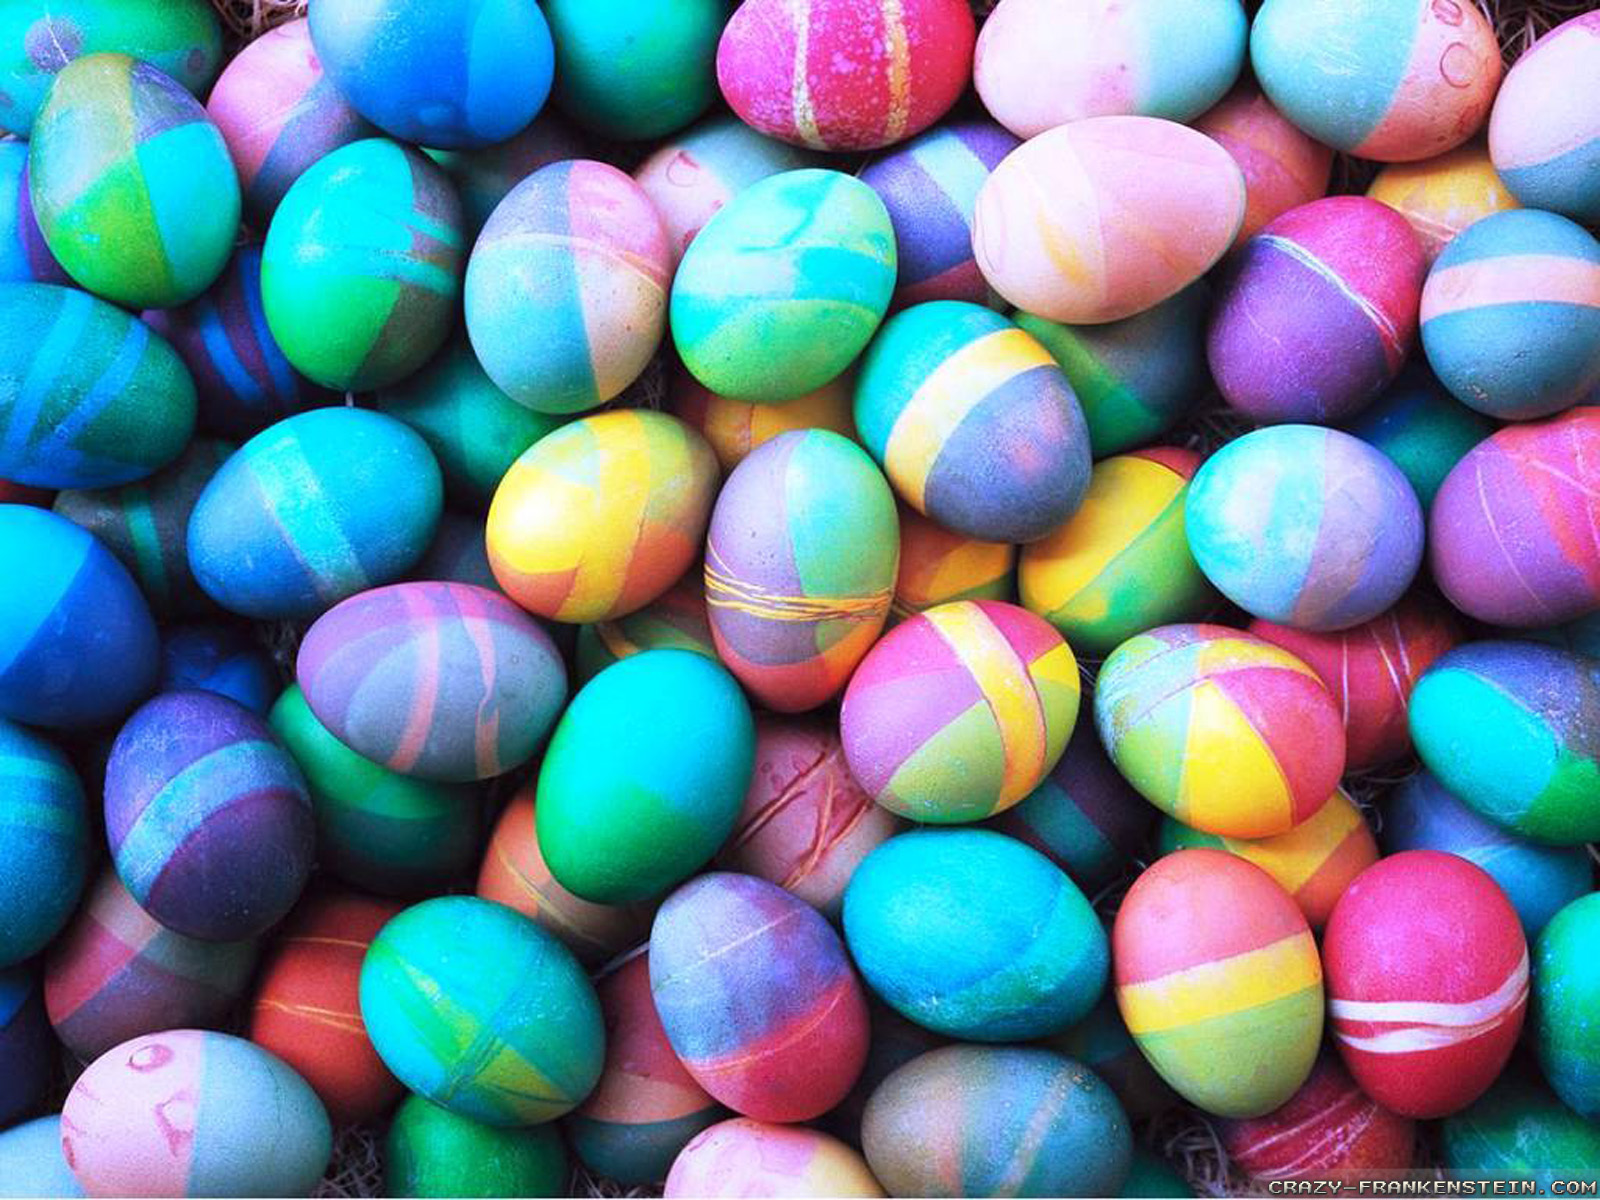 Free download Colorful Easter Eggs Background wallpaper 1600x1200 26340 [1600x1200] for your Desktop, Mobile & Tablet. Explore Easter Egg Desktop Wallpaper. Desktop Wallpaper Easter Image, 3D Easter Desktop Wallpaper